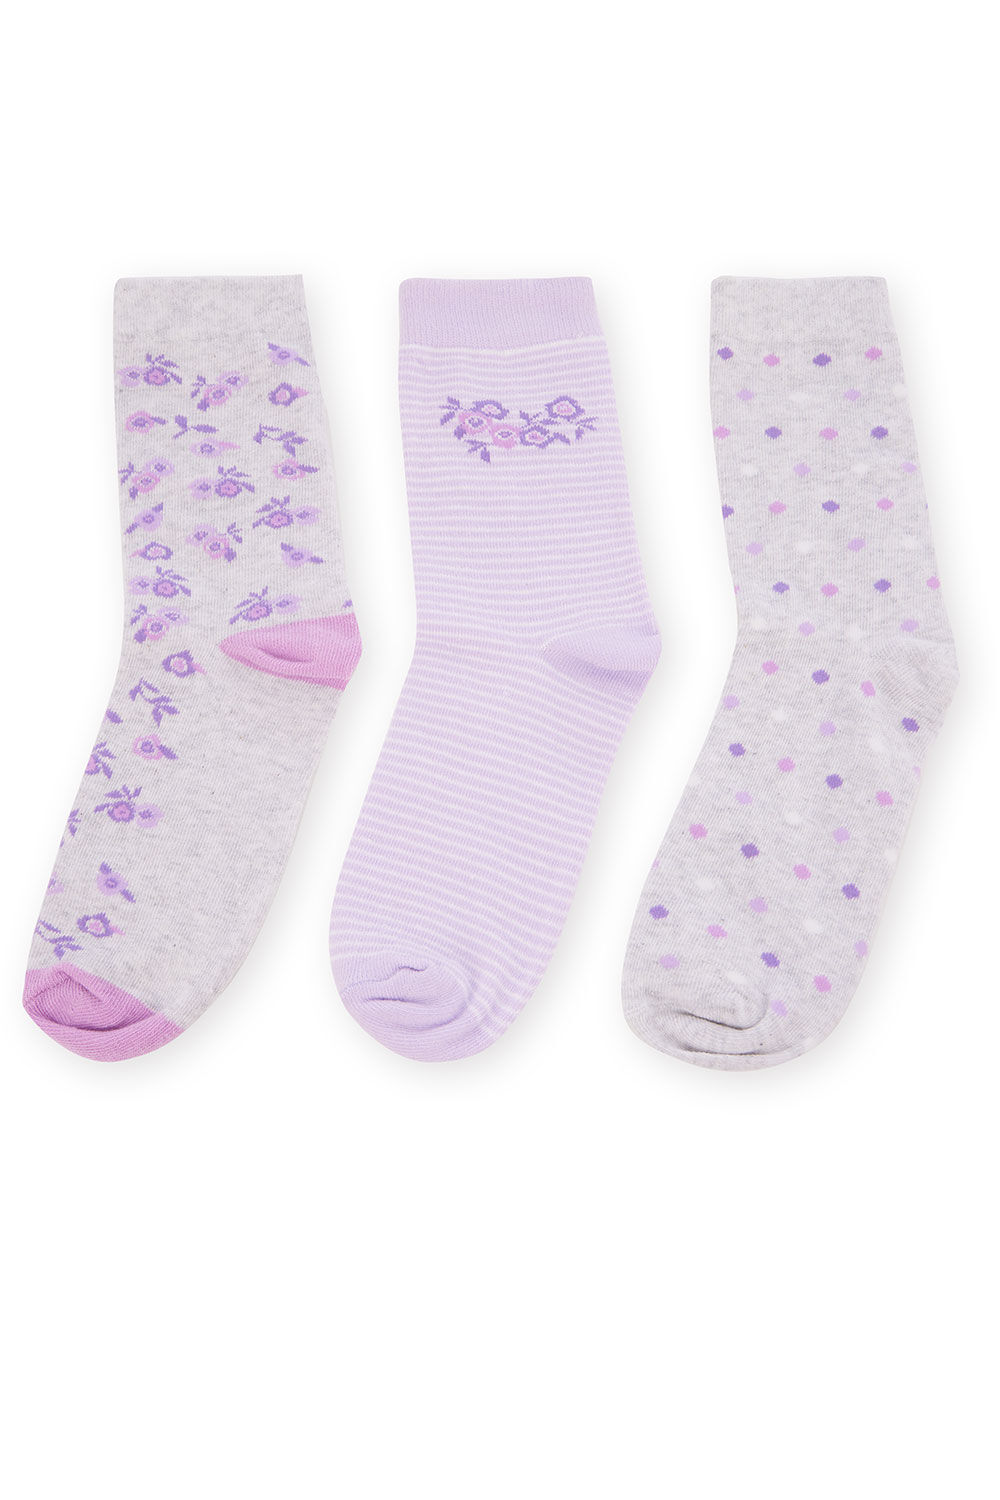 Bonmarche 3 Pack Lilac Floral and Grey Marl Design Socks, Size: One Size